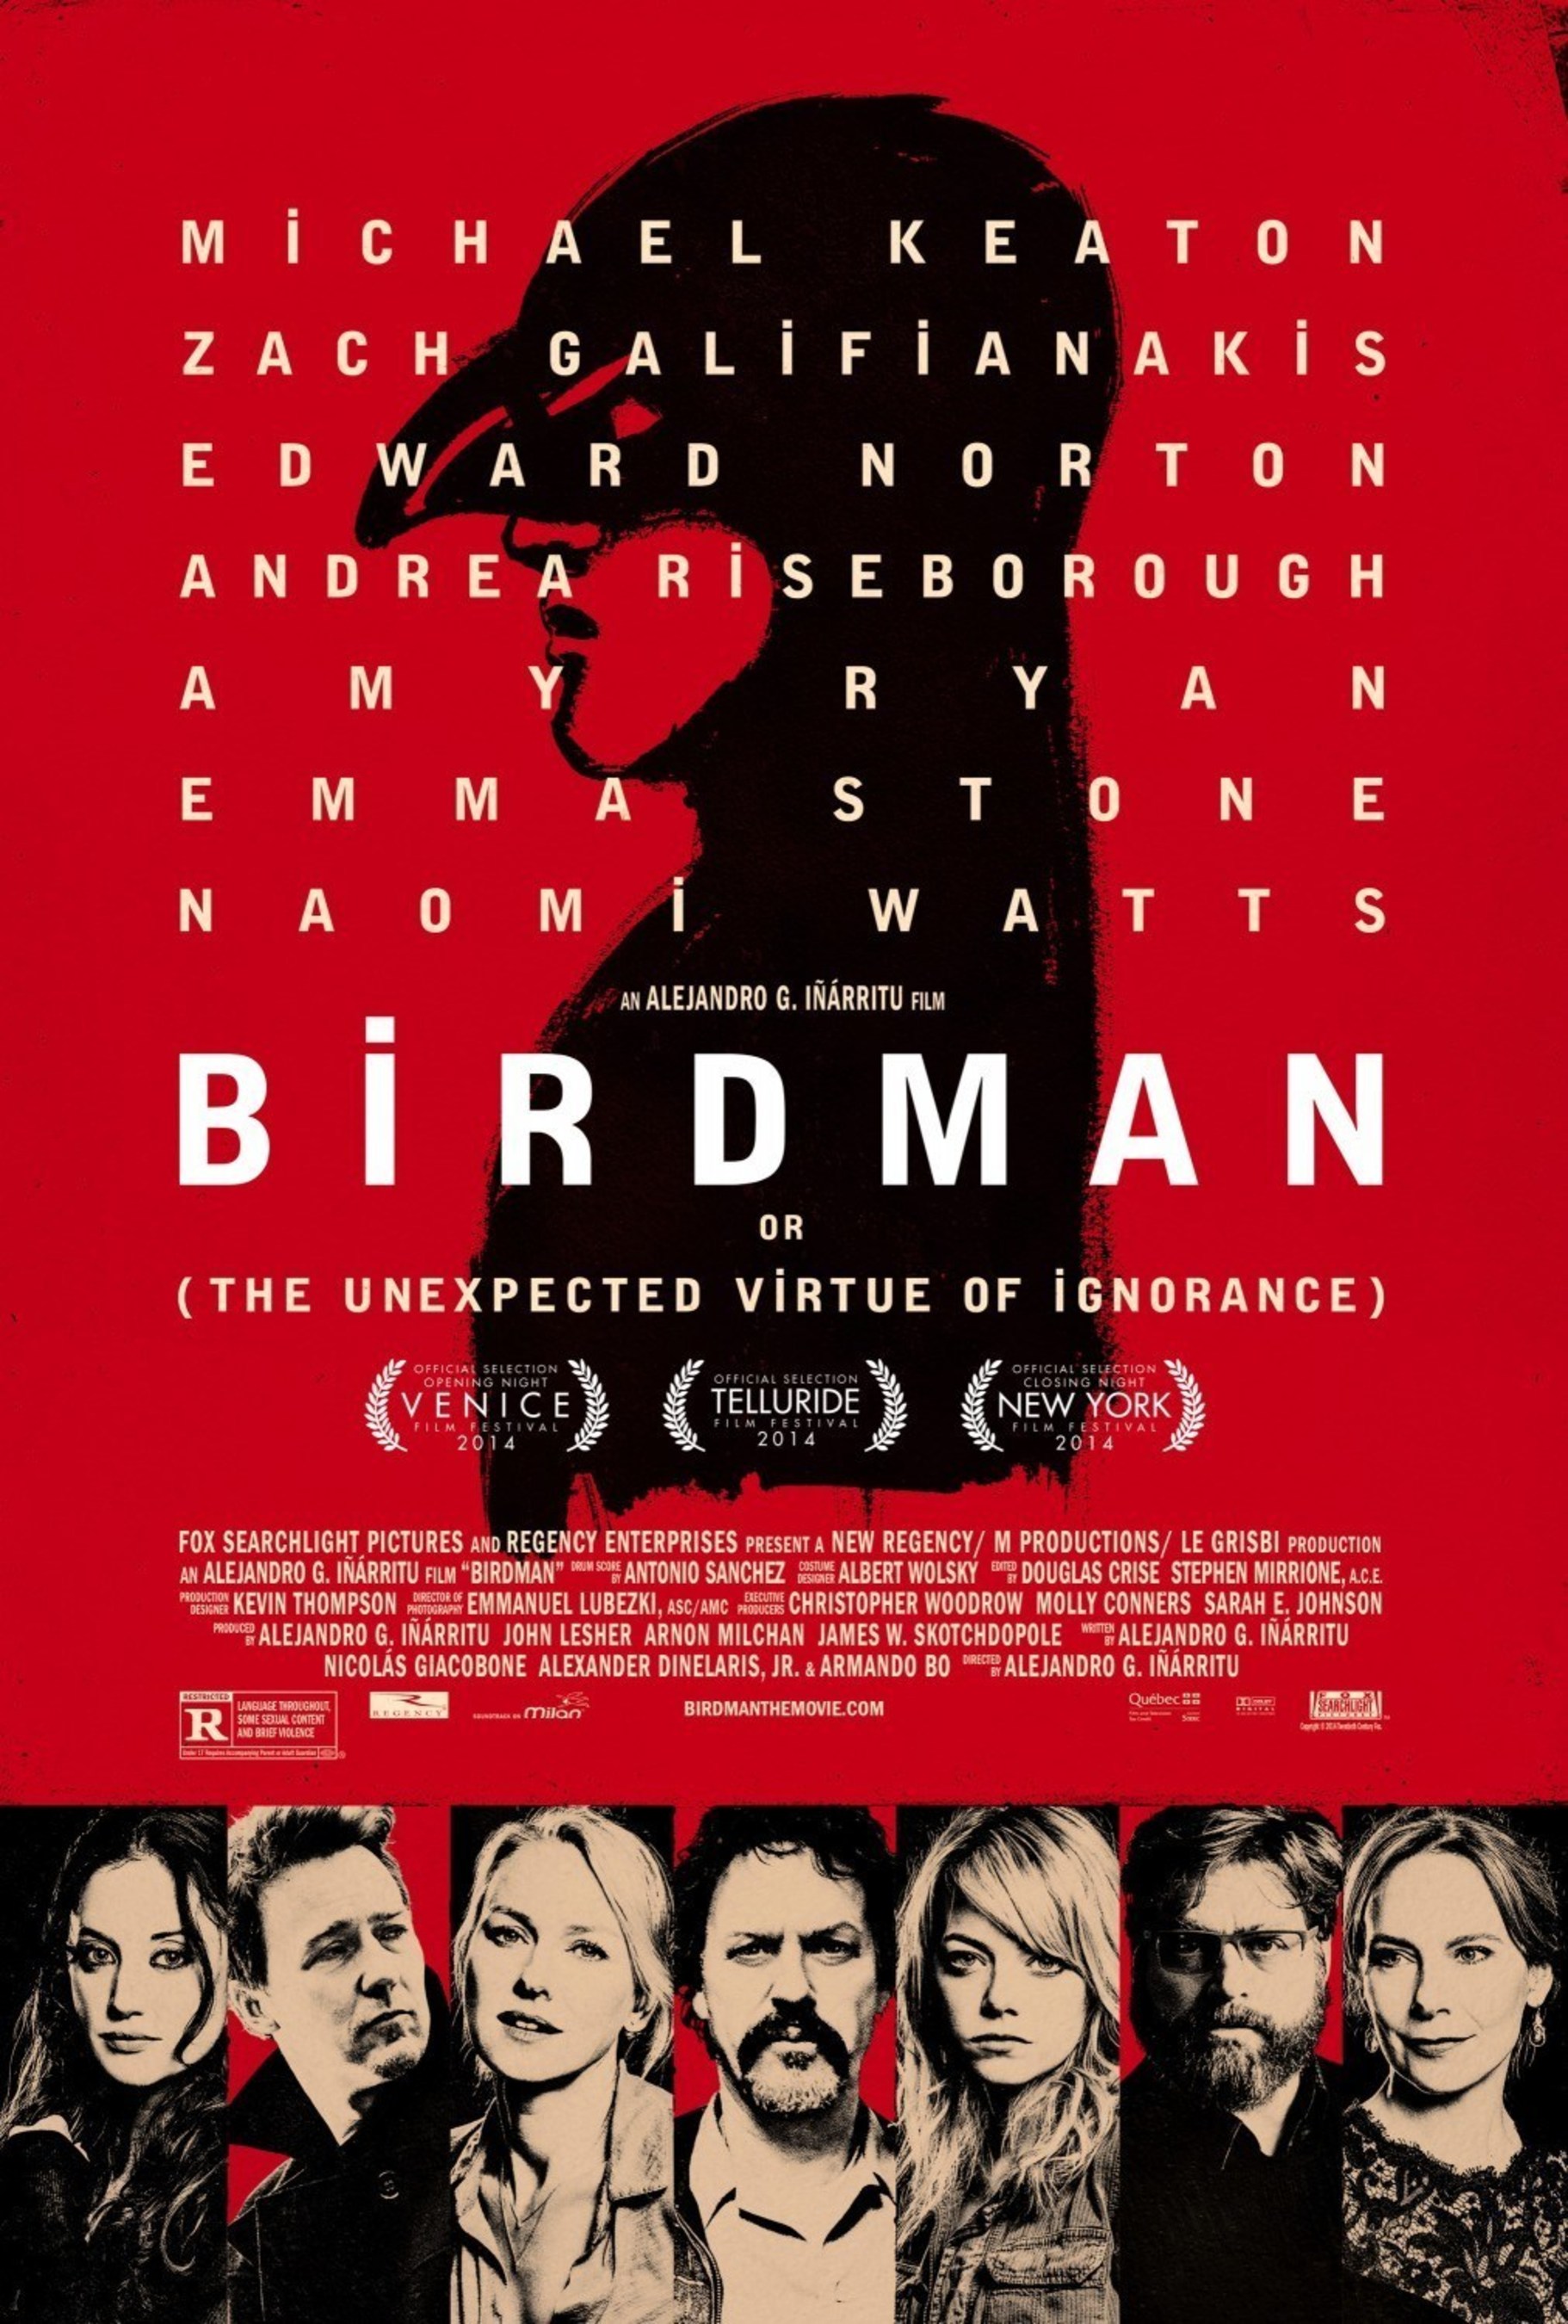 Regal Entertainment Group offers Buy One, Get One Free tickets for "Birdman". Image Source: Fox Searchlight Pictures